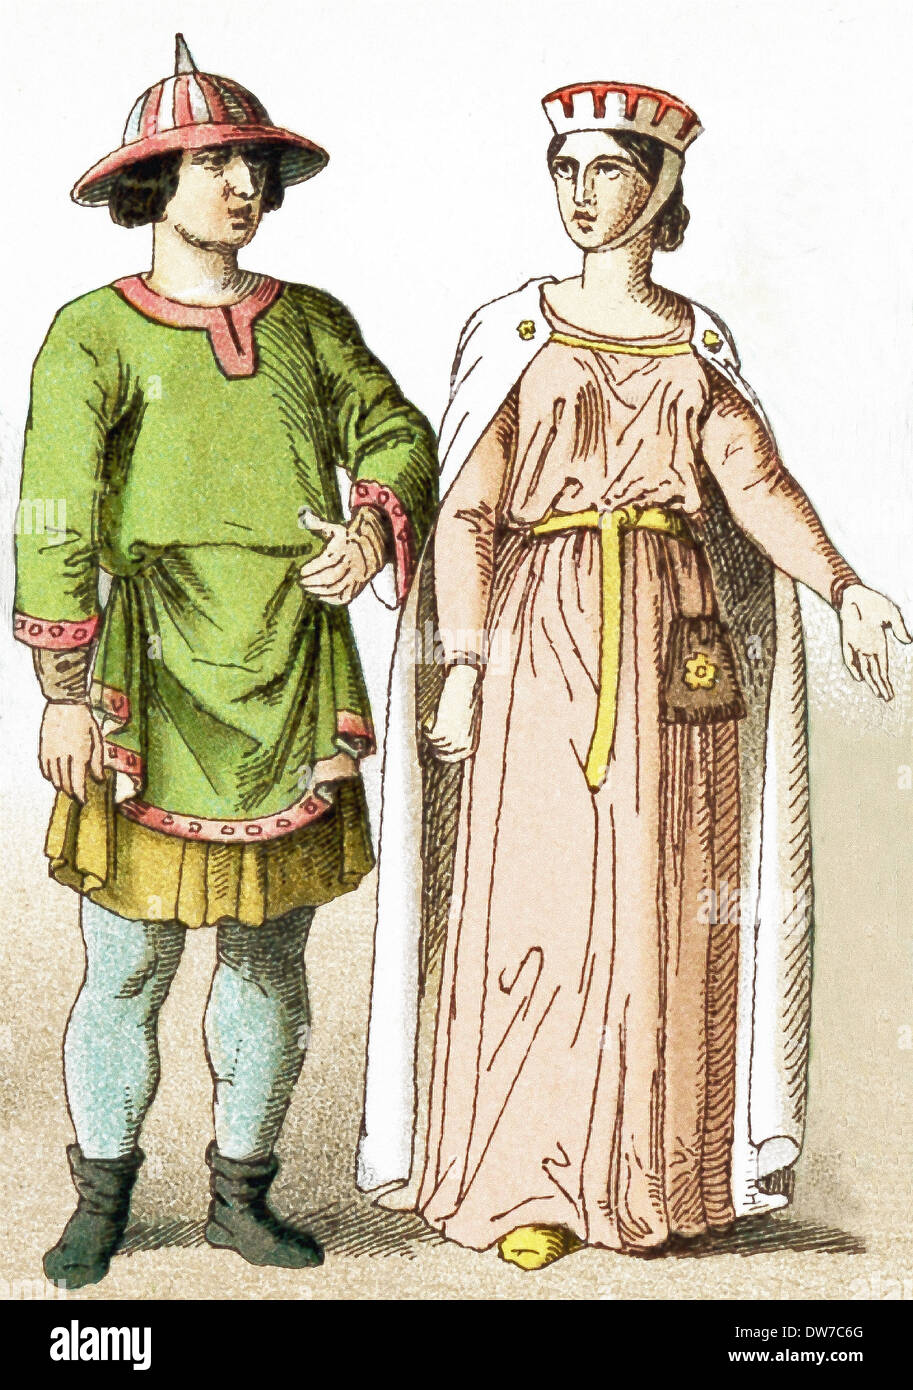 Represented here are a French man of rank and a French lady of rank around A.D. 1100. The illustration dates to 1882. Stock Photo